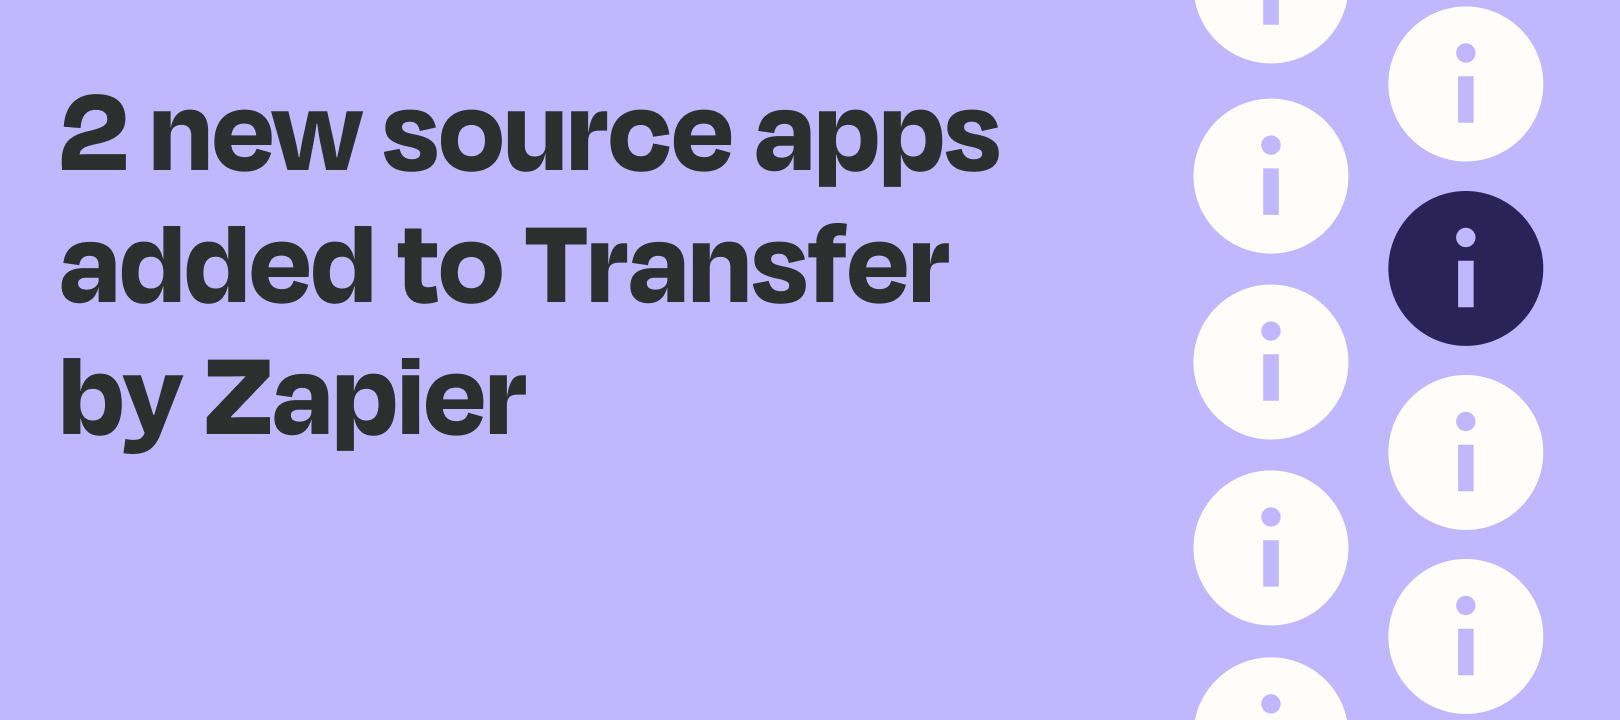 We've added two new source apps to Transfer by Zapier: Zoho CRM and Cvent